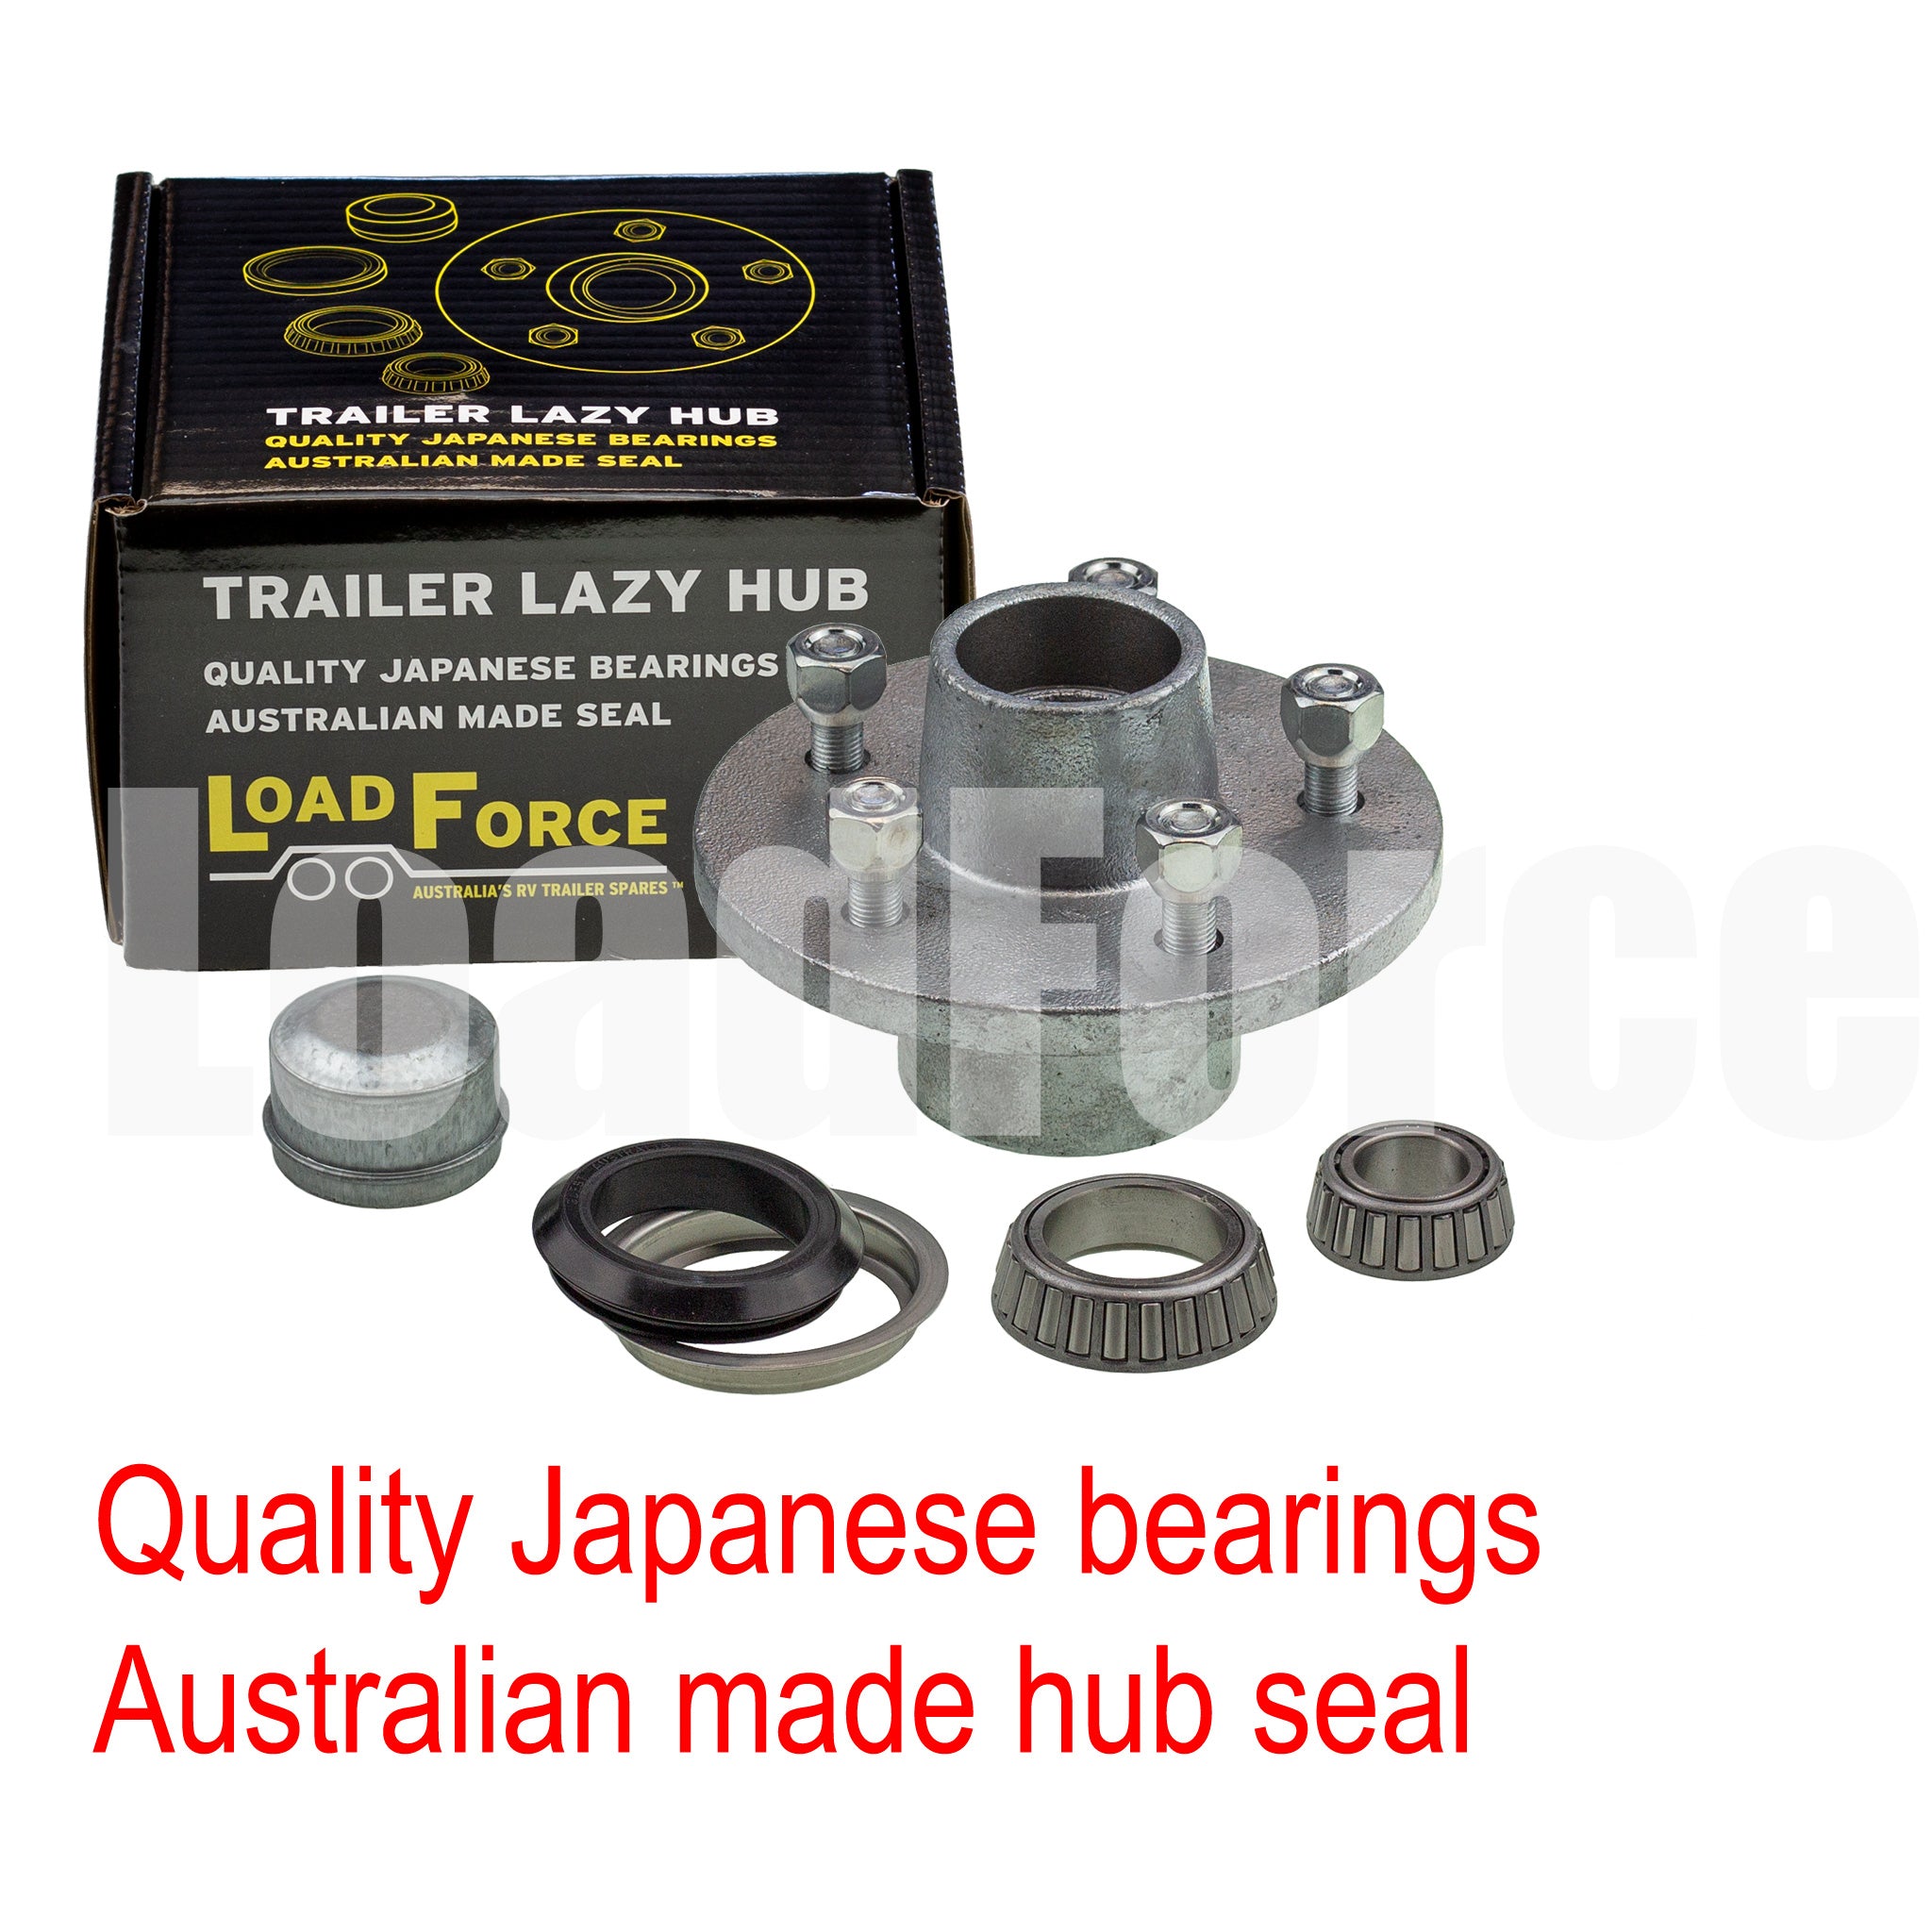 LoadForce 6 inch lazy hub assembly Commodore 5 stud LM (Holden) bearing - galvanised